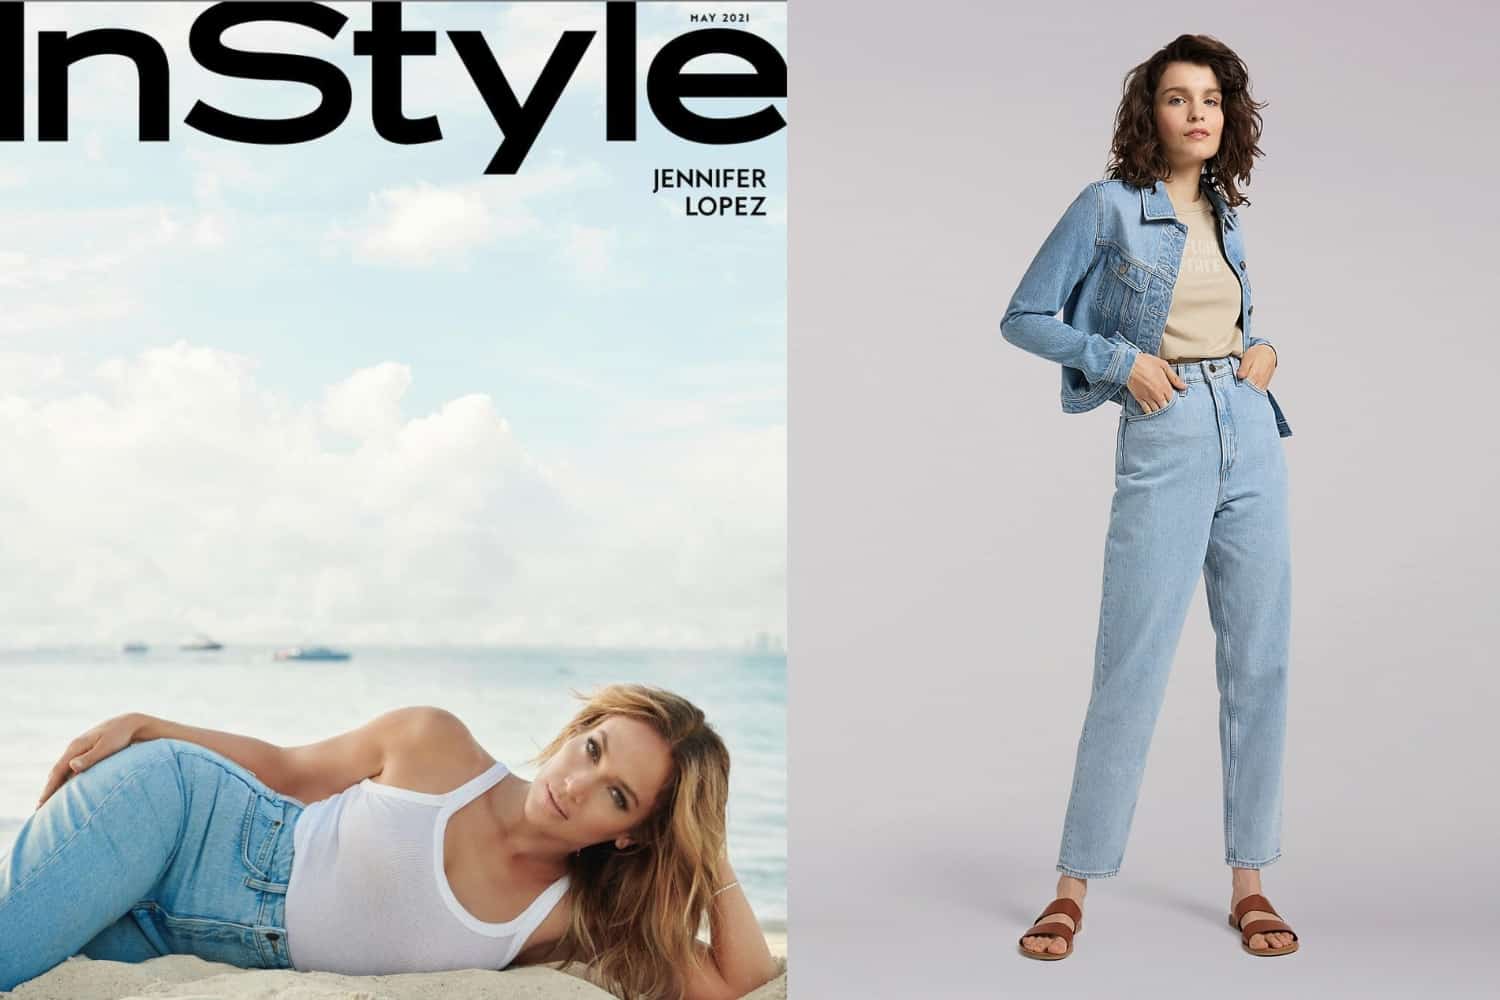 Jlo Wore These Editor Favorite Jeans By Lee On Her Instyle Cover